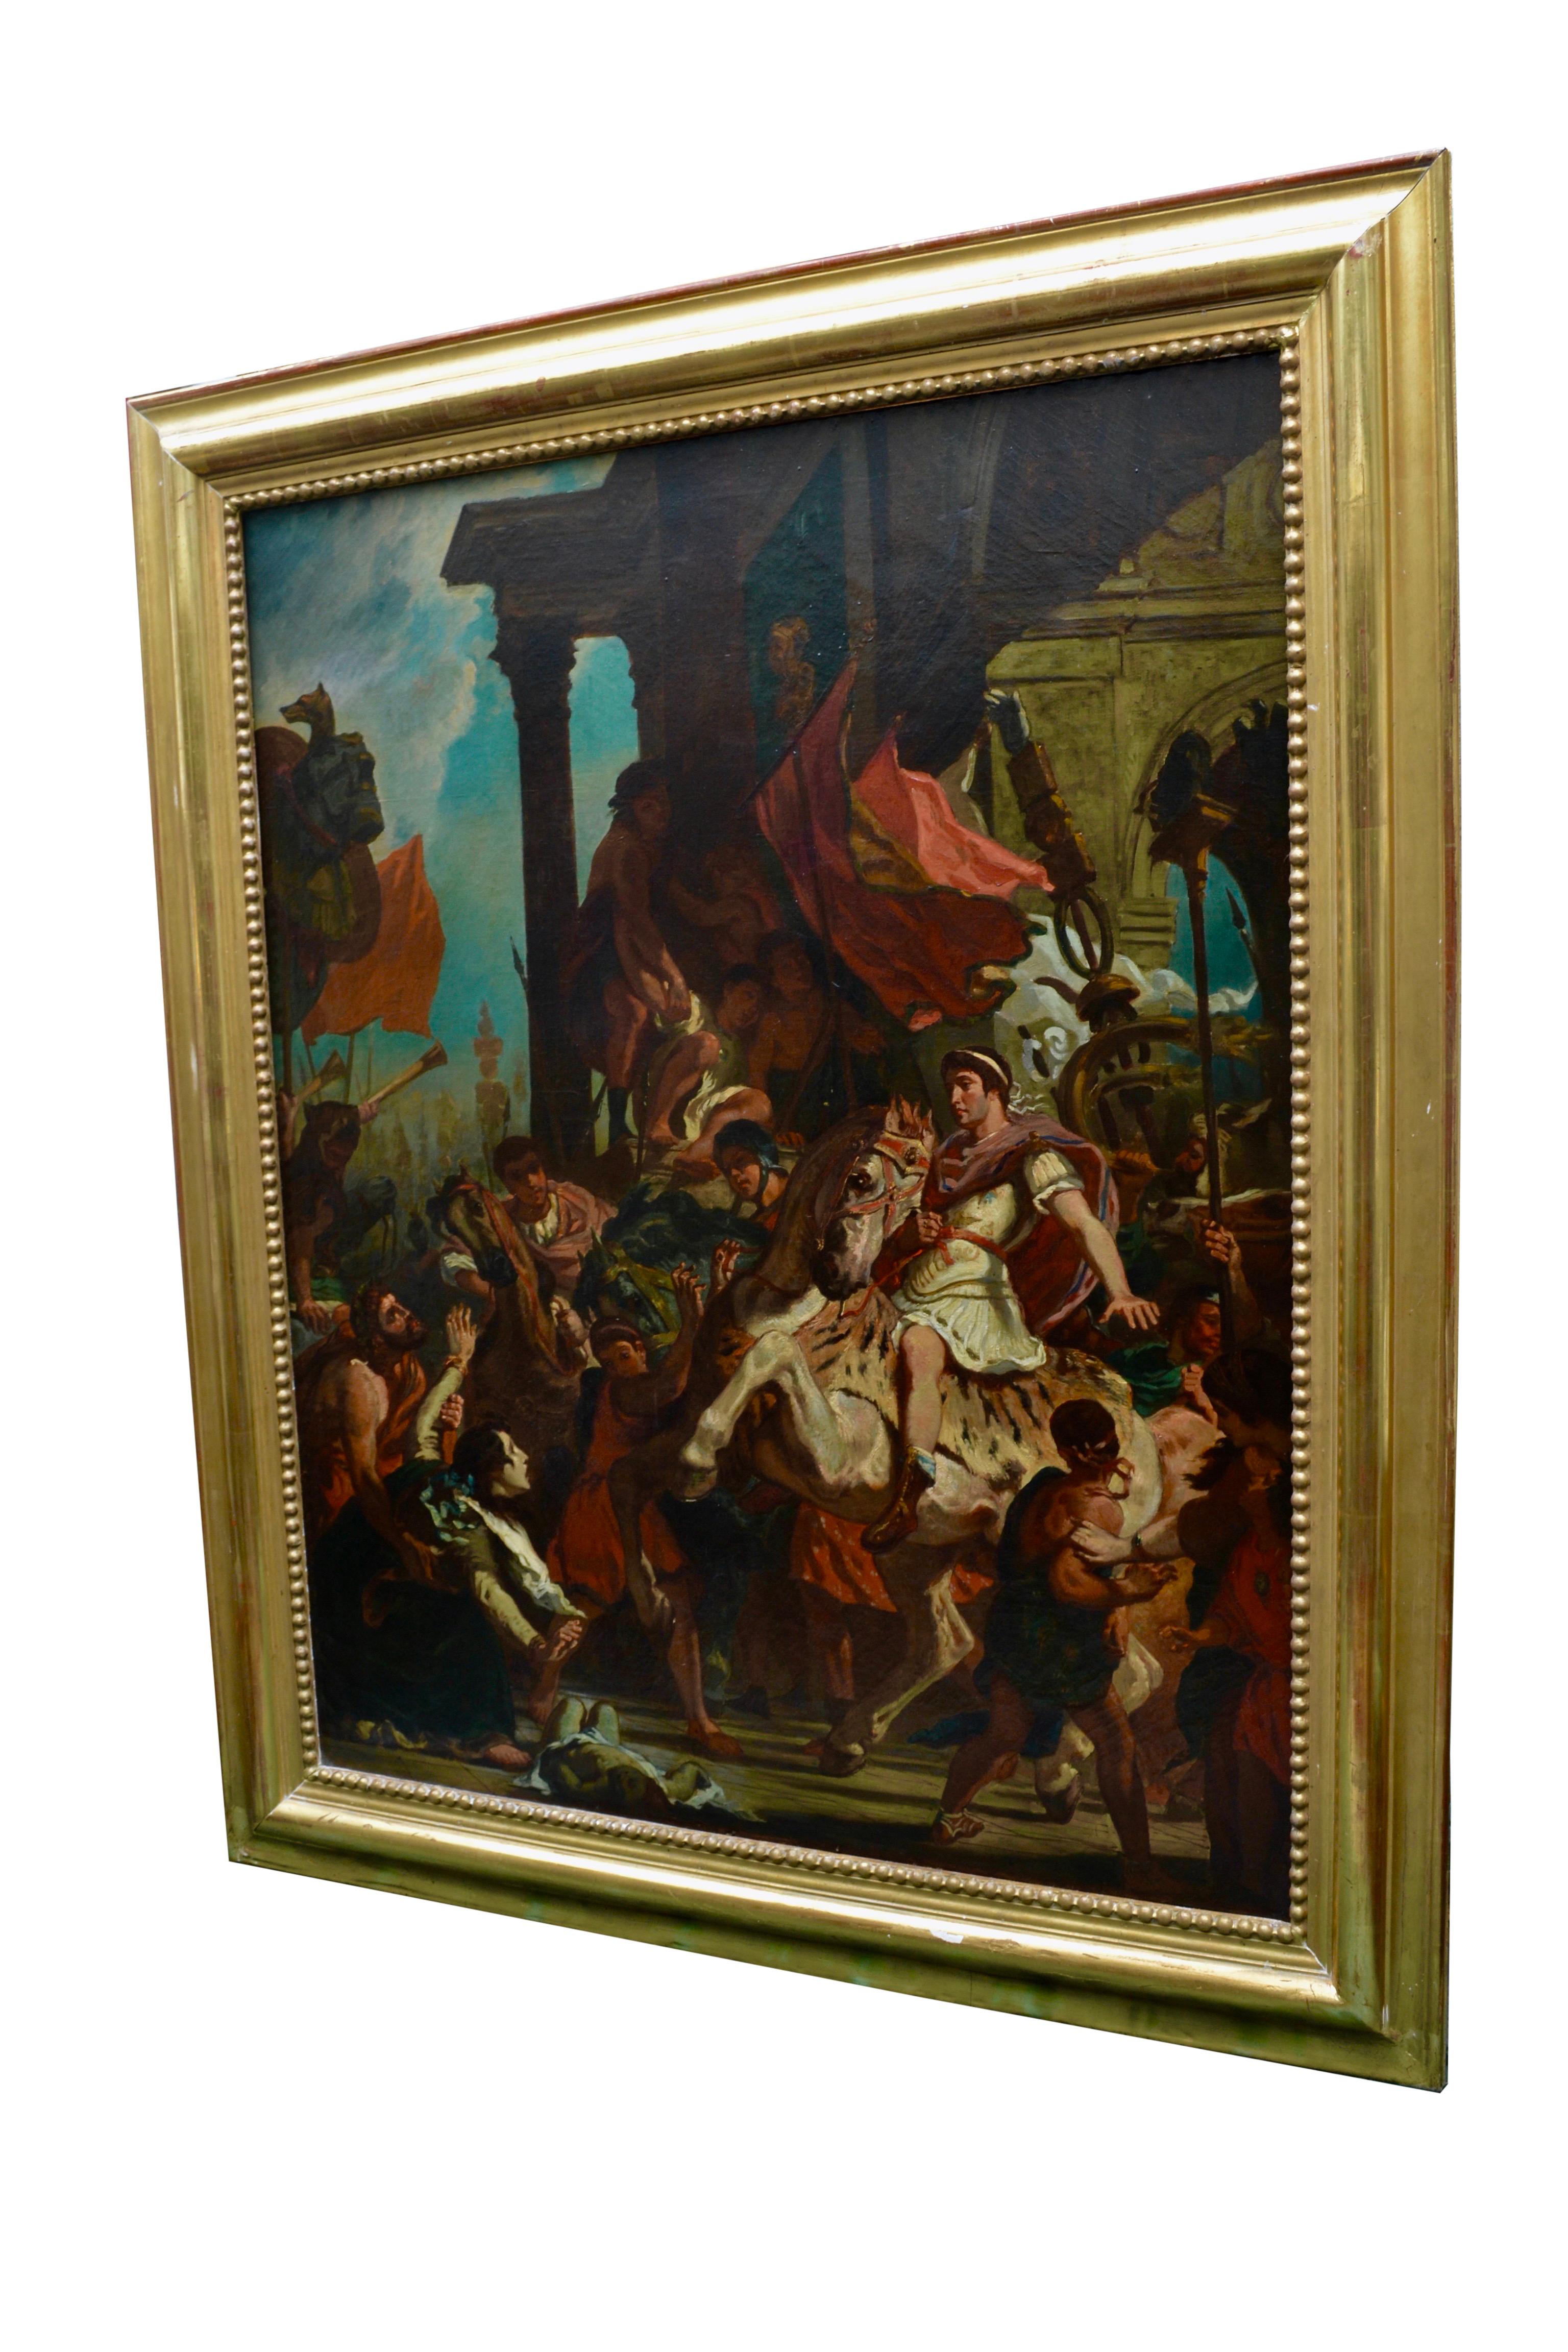 A large dramatic and colorful painting of the young emperor Trajan on rearing horseback entering Rome amid a chaotic mass of young and old people all round him. Many beg him for help as his supporters try and keep them away from him. Roman arches